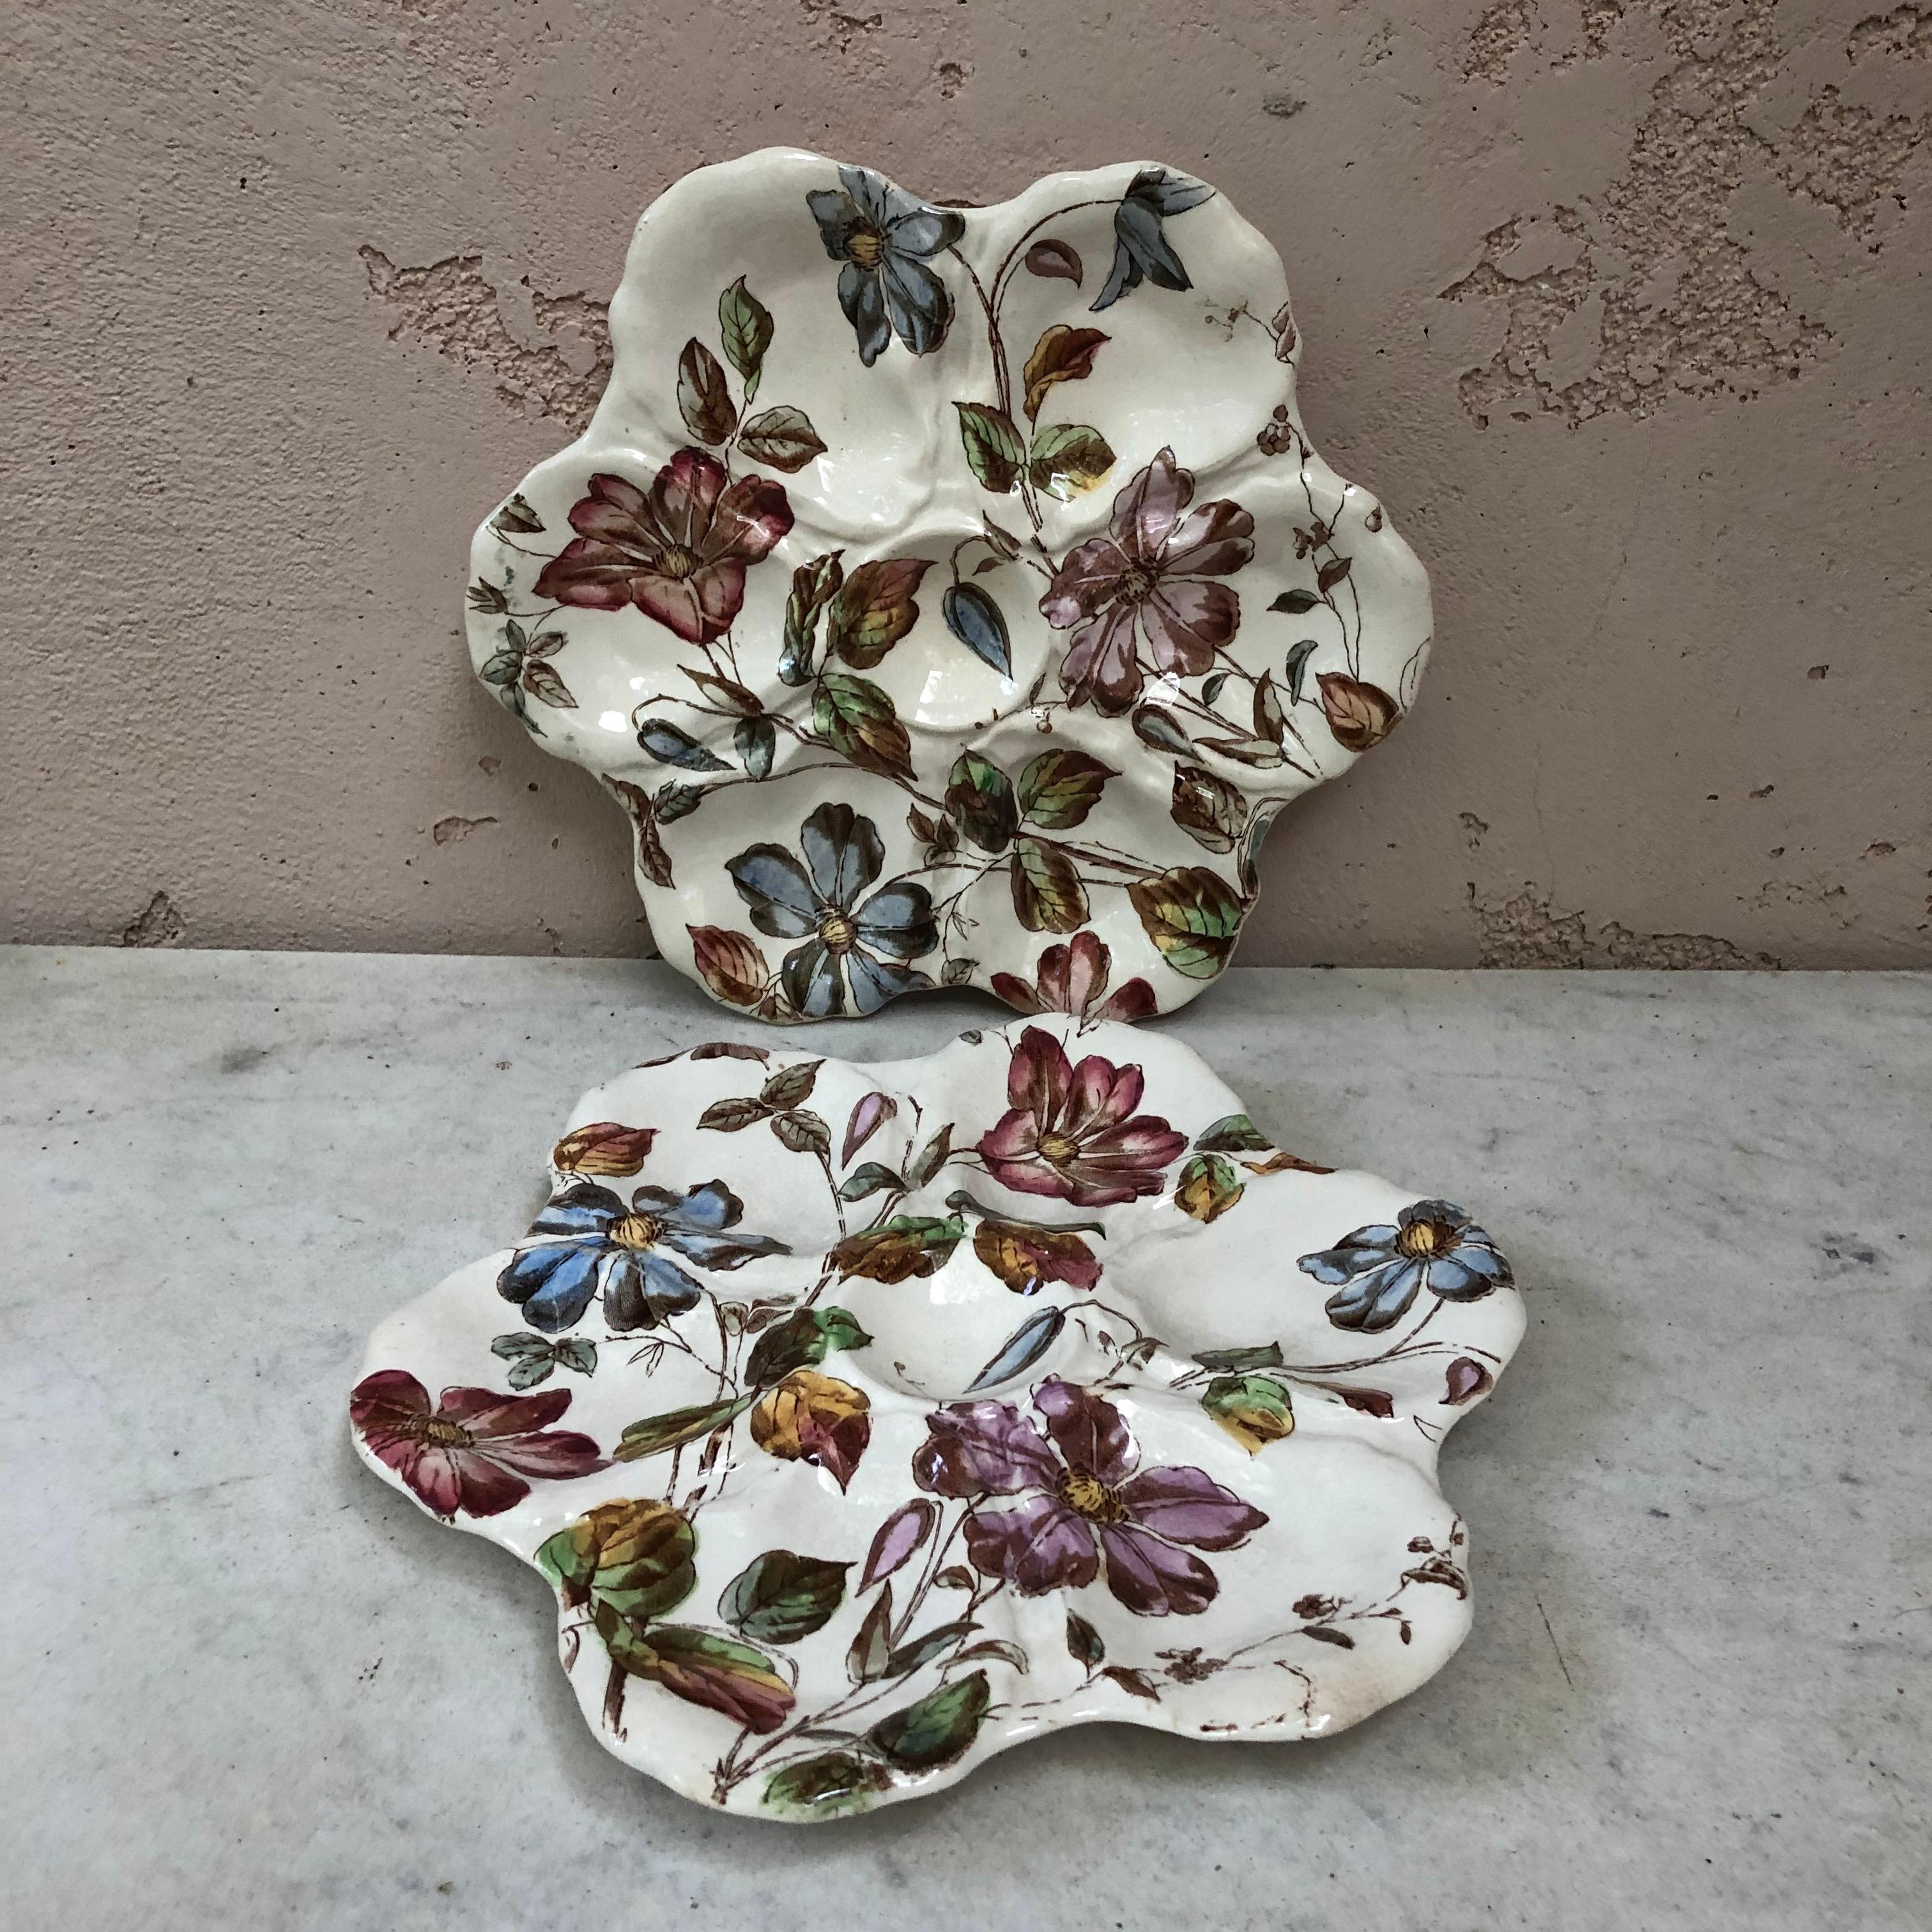 Ceramic 19th Century English Oyster Plate with Flowers Adderley